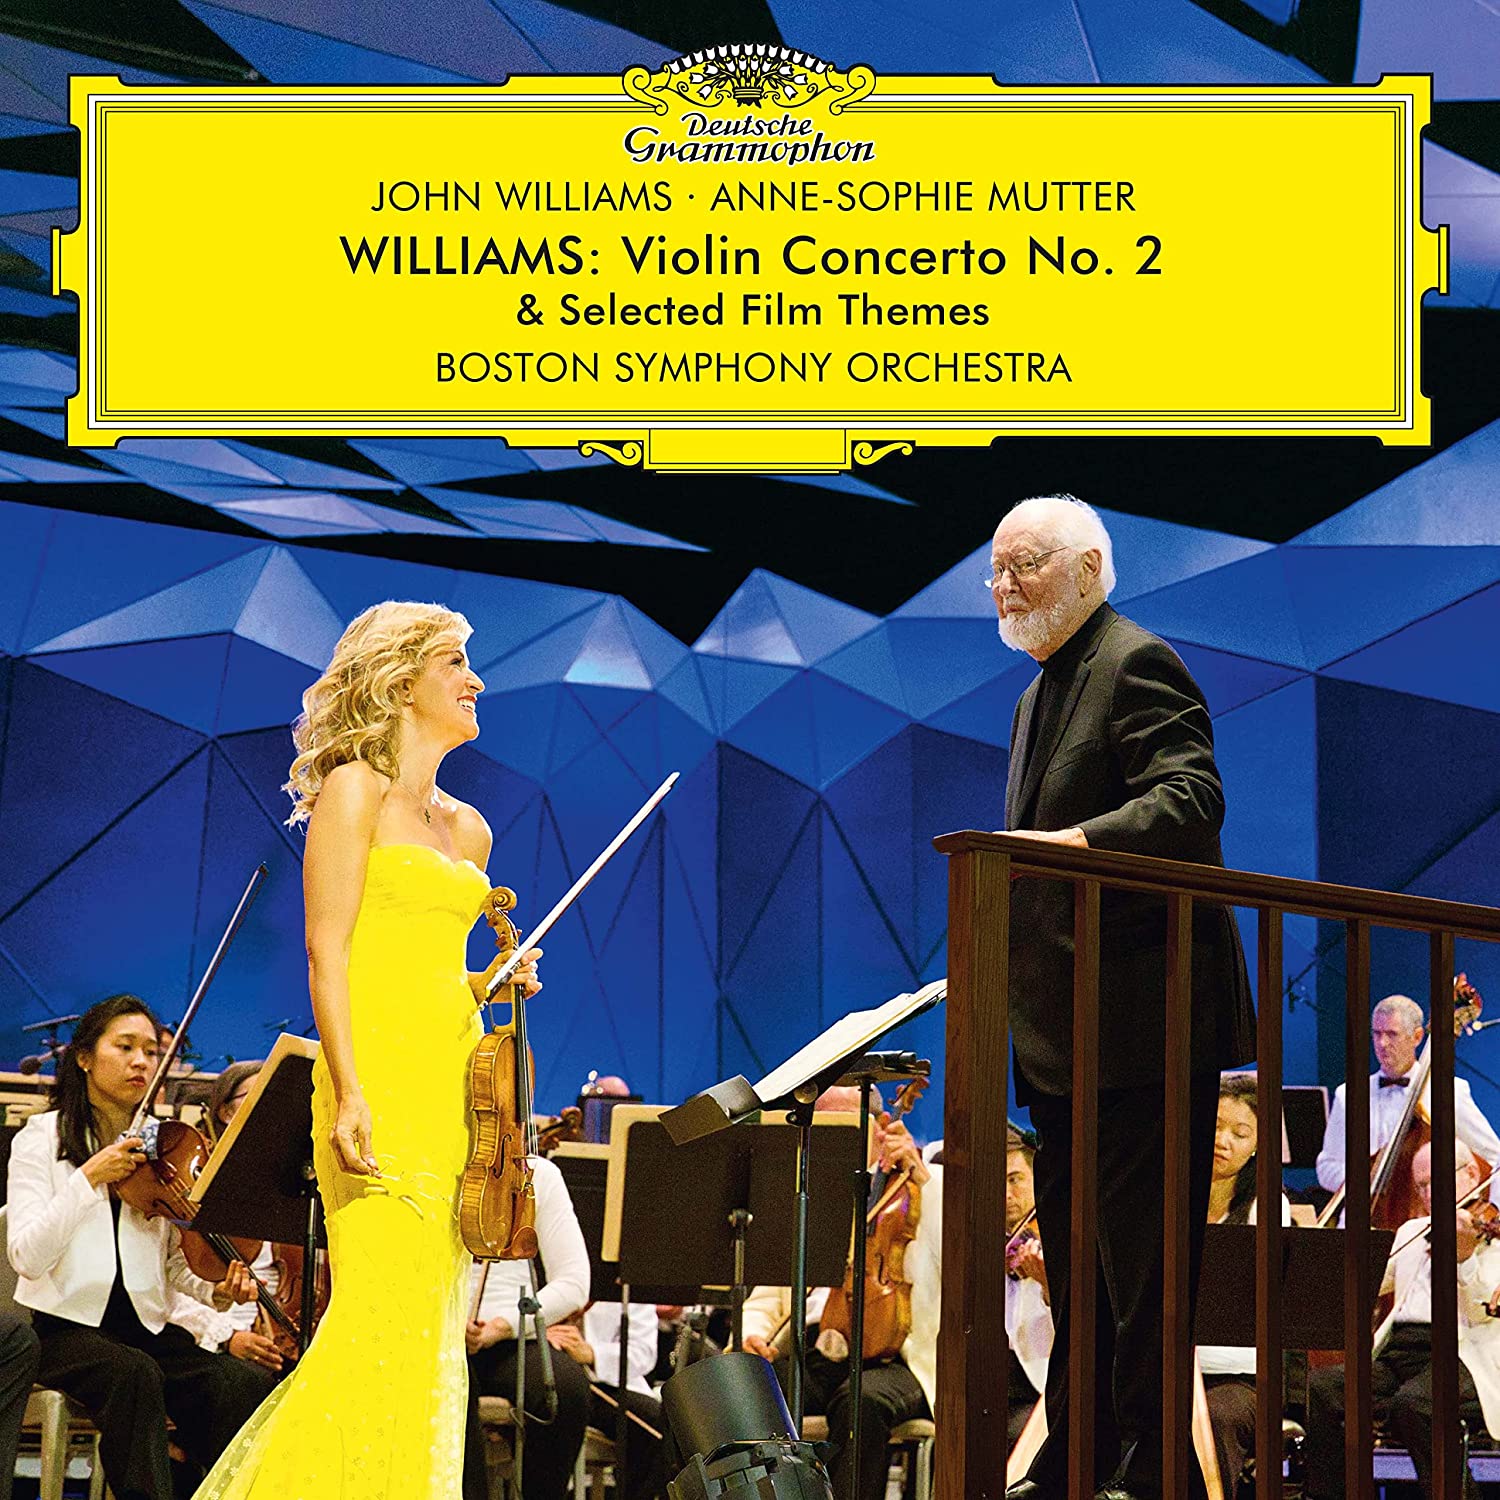 Williams: Violin Concerto No. 2 & Selected Film Themes | John Williams, Anne-Sophie Mutter, Boston Symphony Orchestra